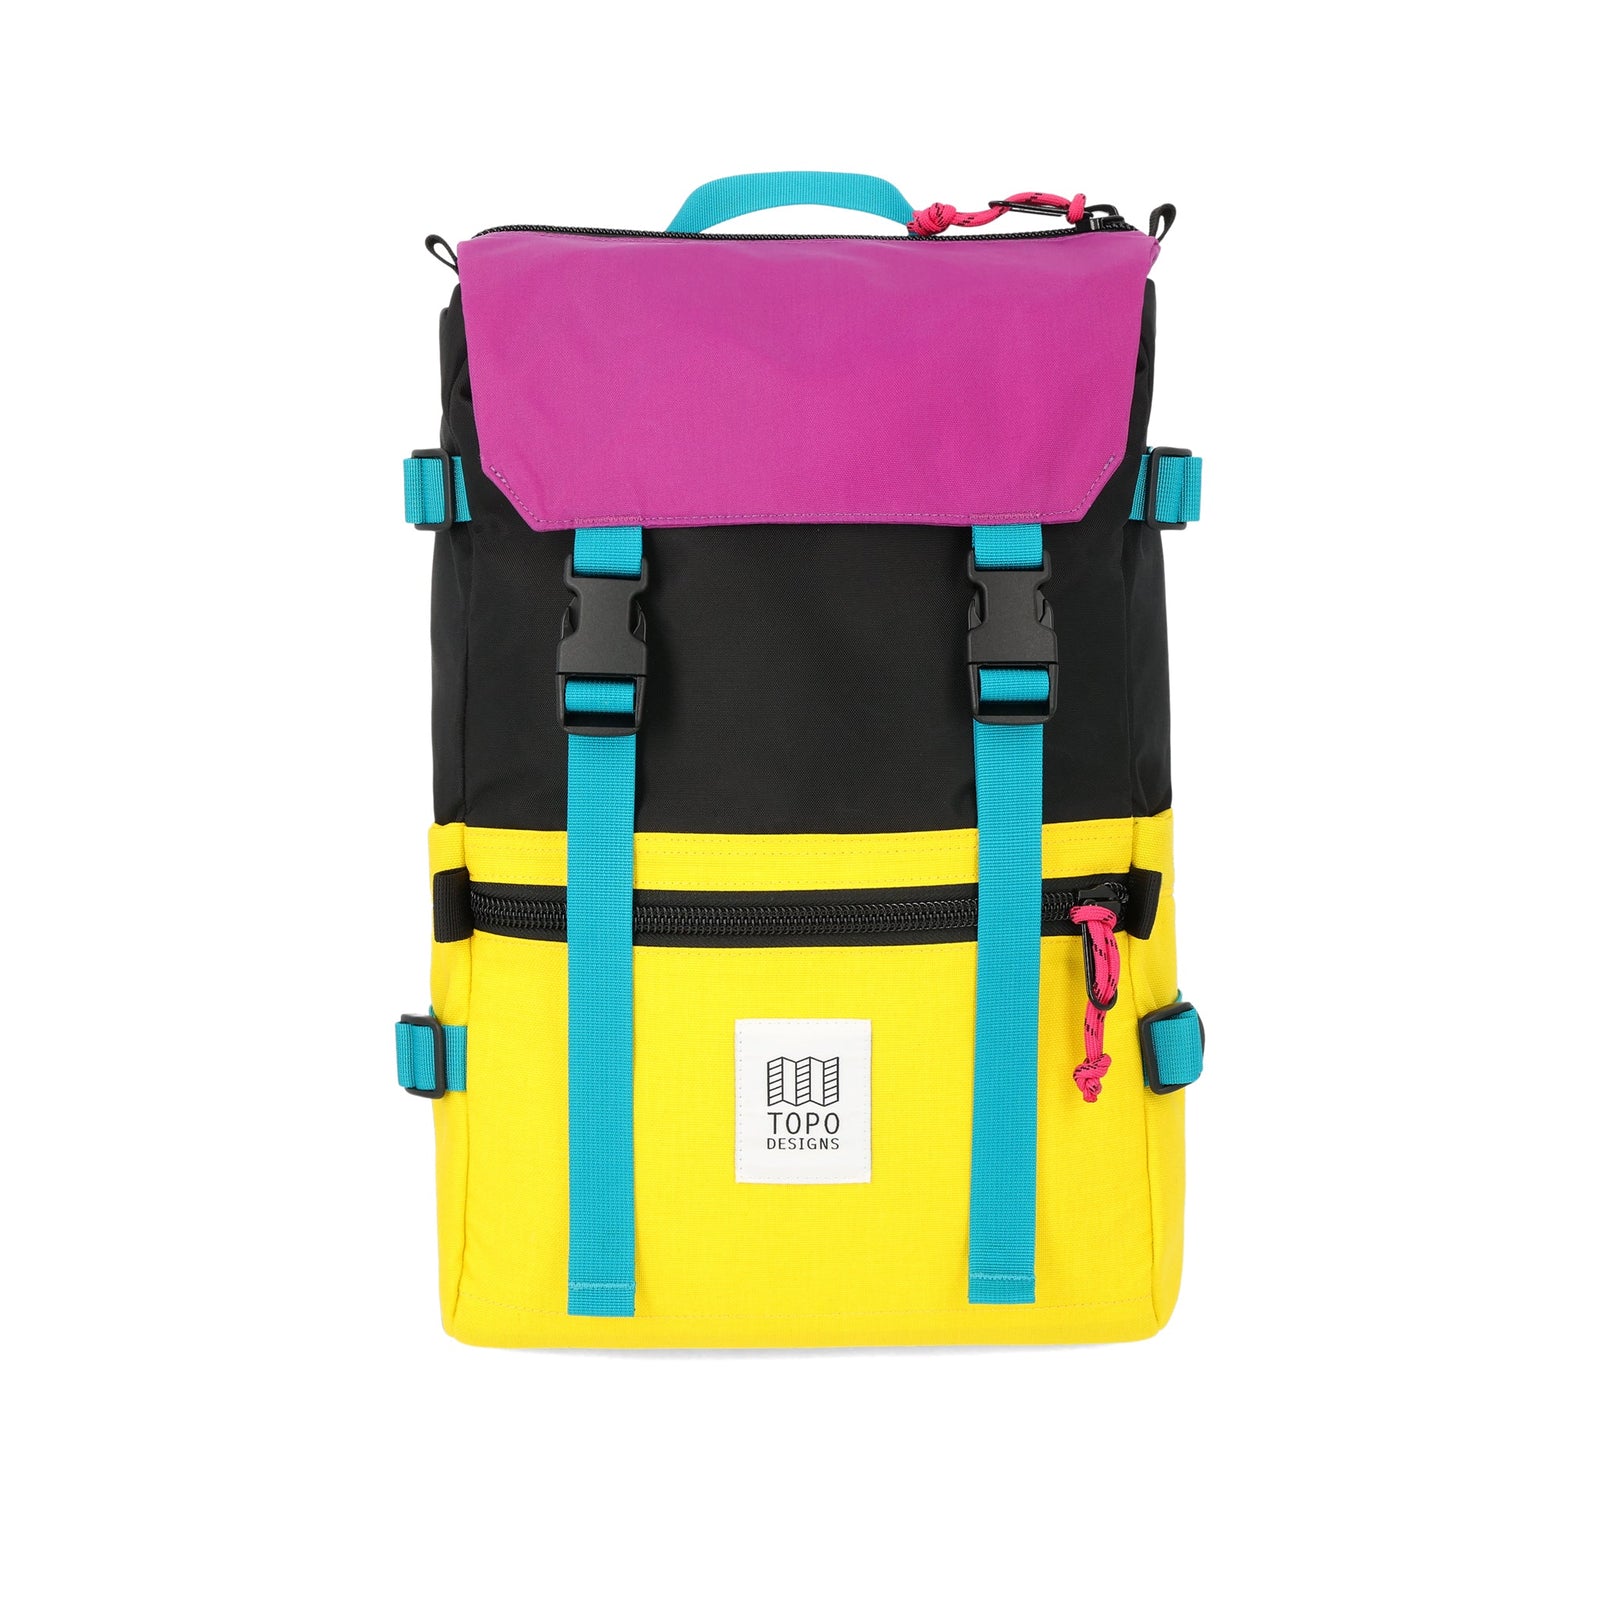 Topo Designs Rover Pack Classic laptop backpack in "Bright Yellow / Black".